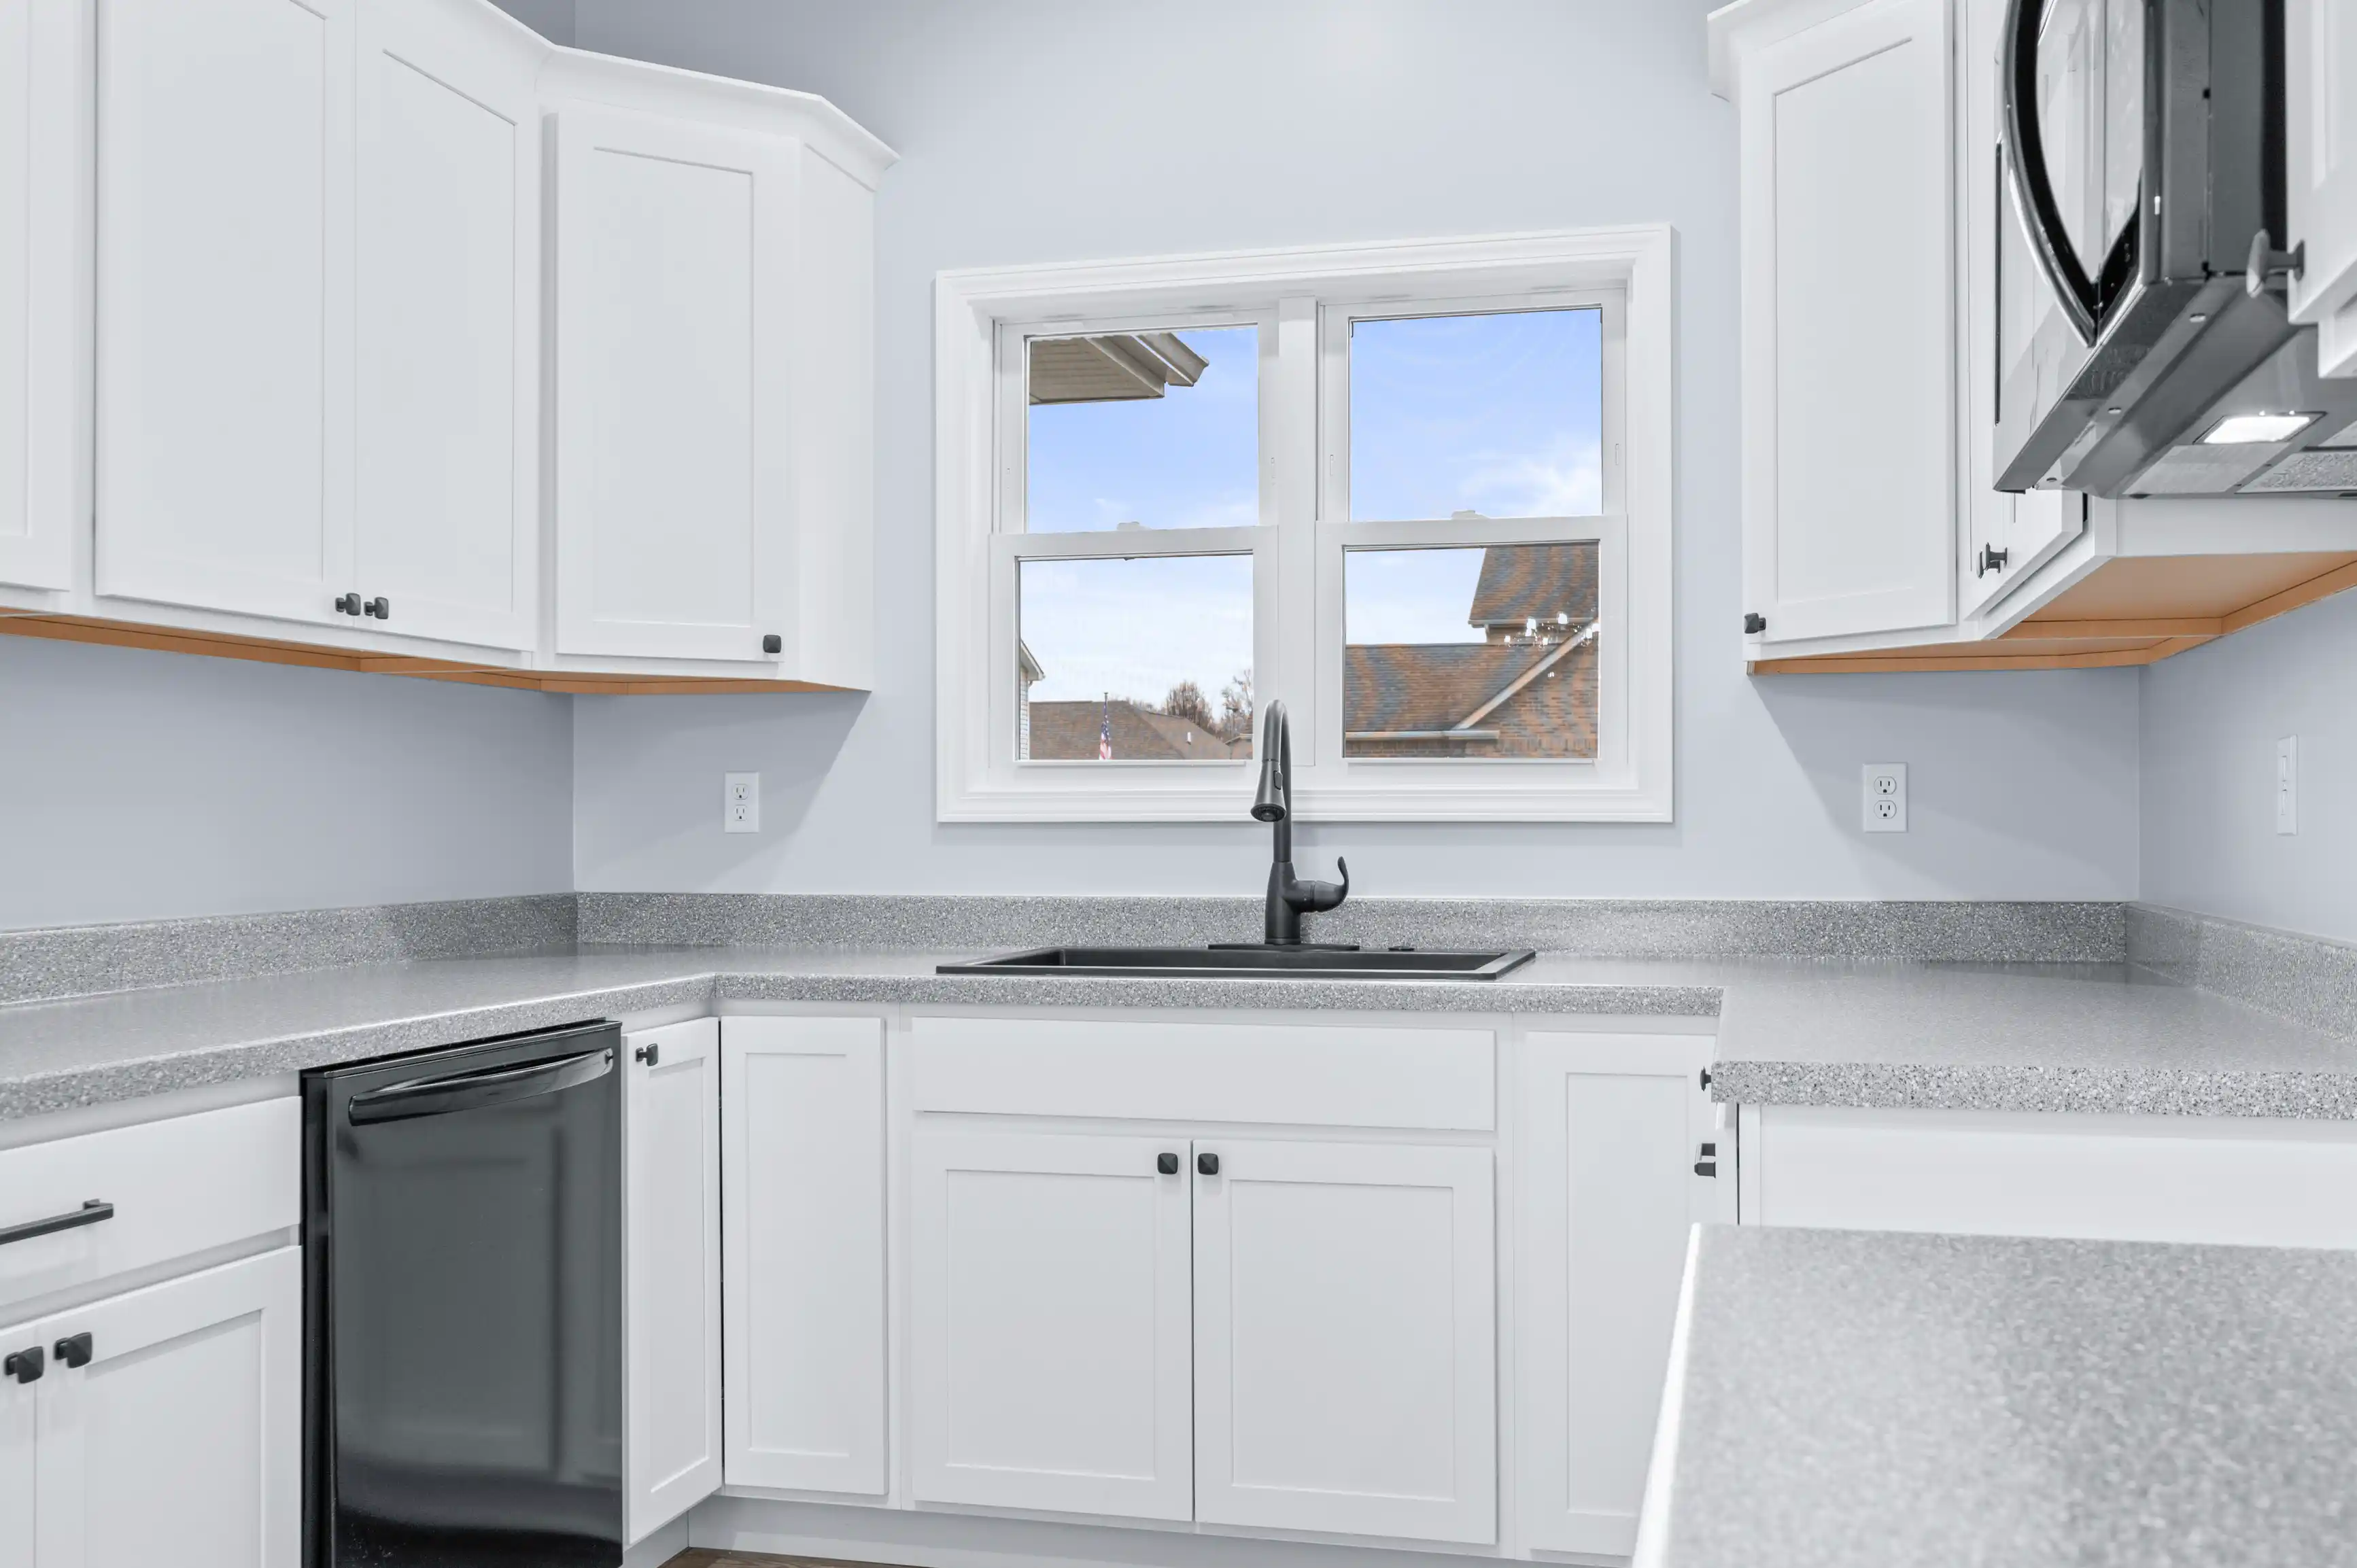 Modern kitchen interior with white cabinetry, granite countertops, and a window with a view of the sky and nearby rooftops.